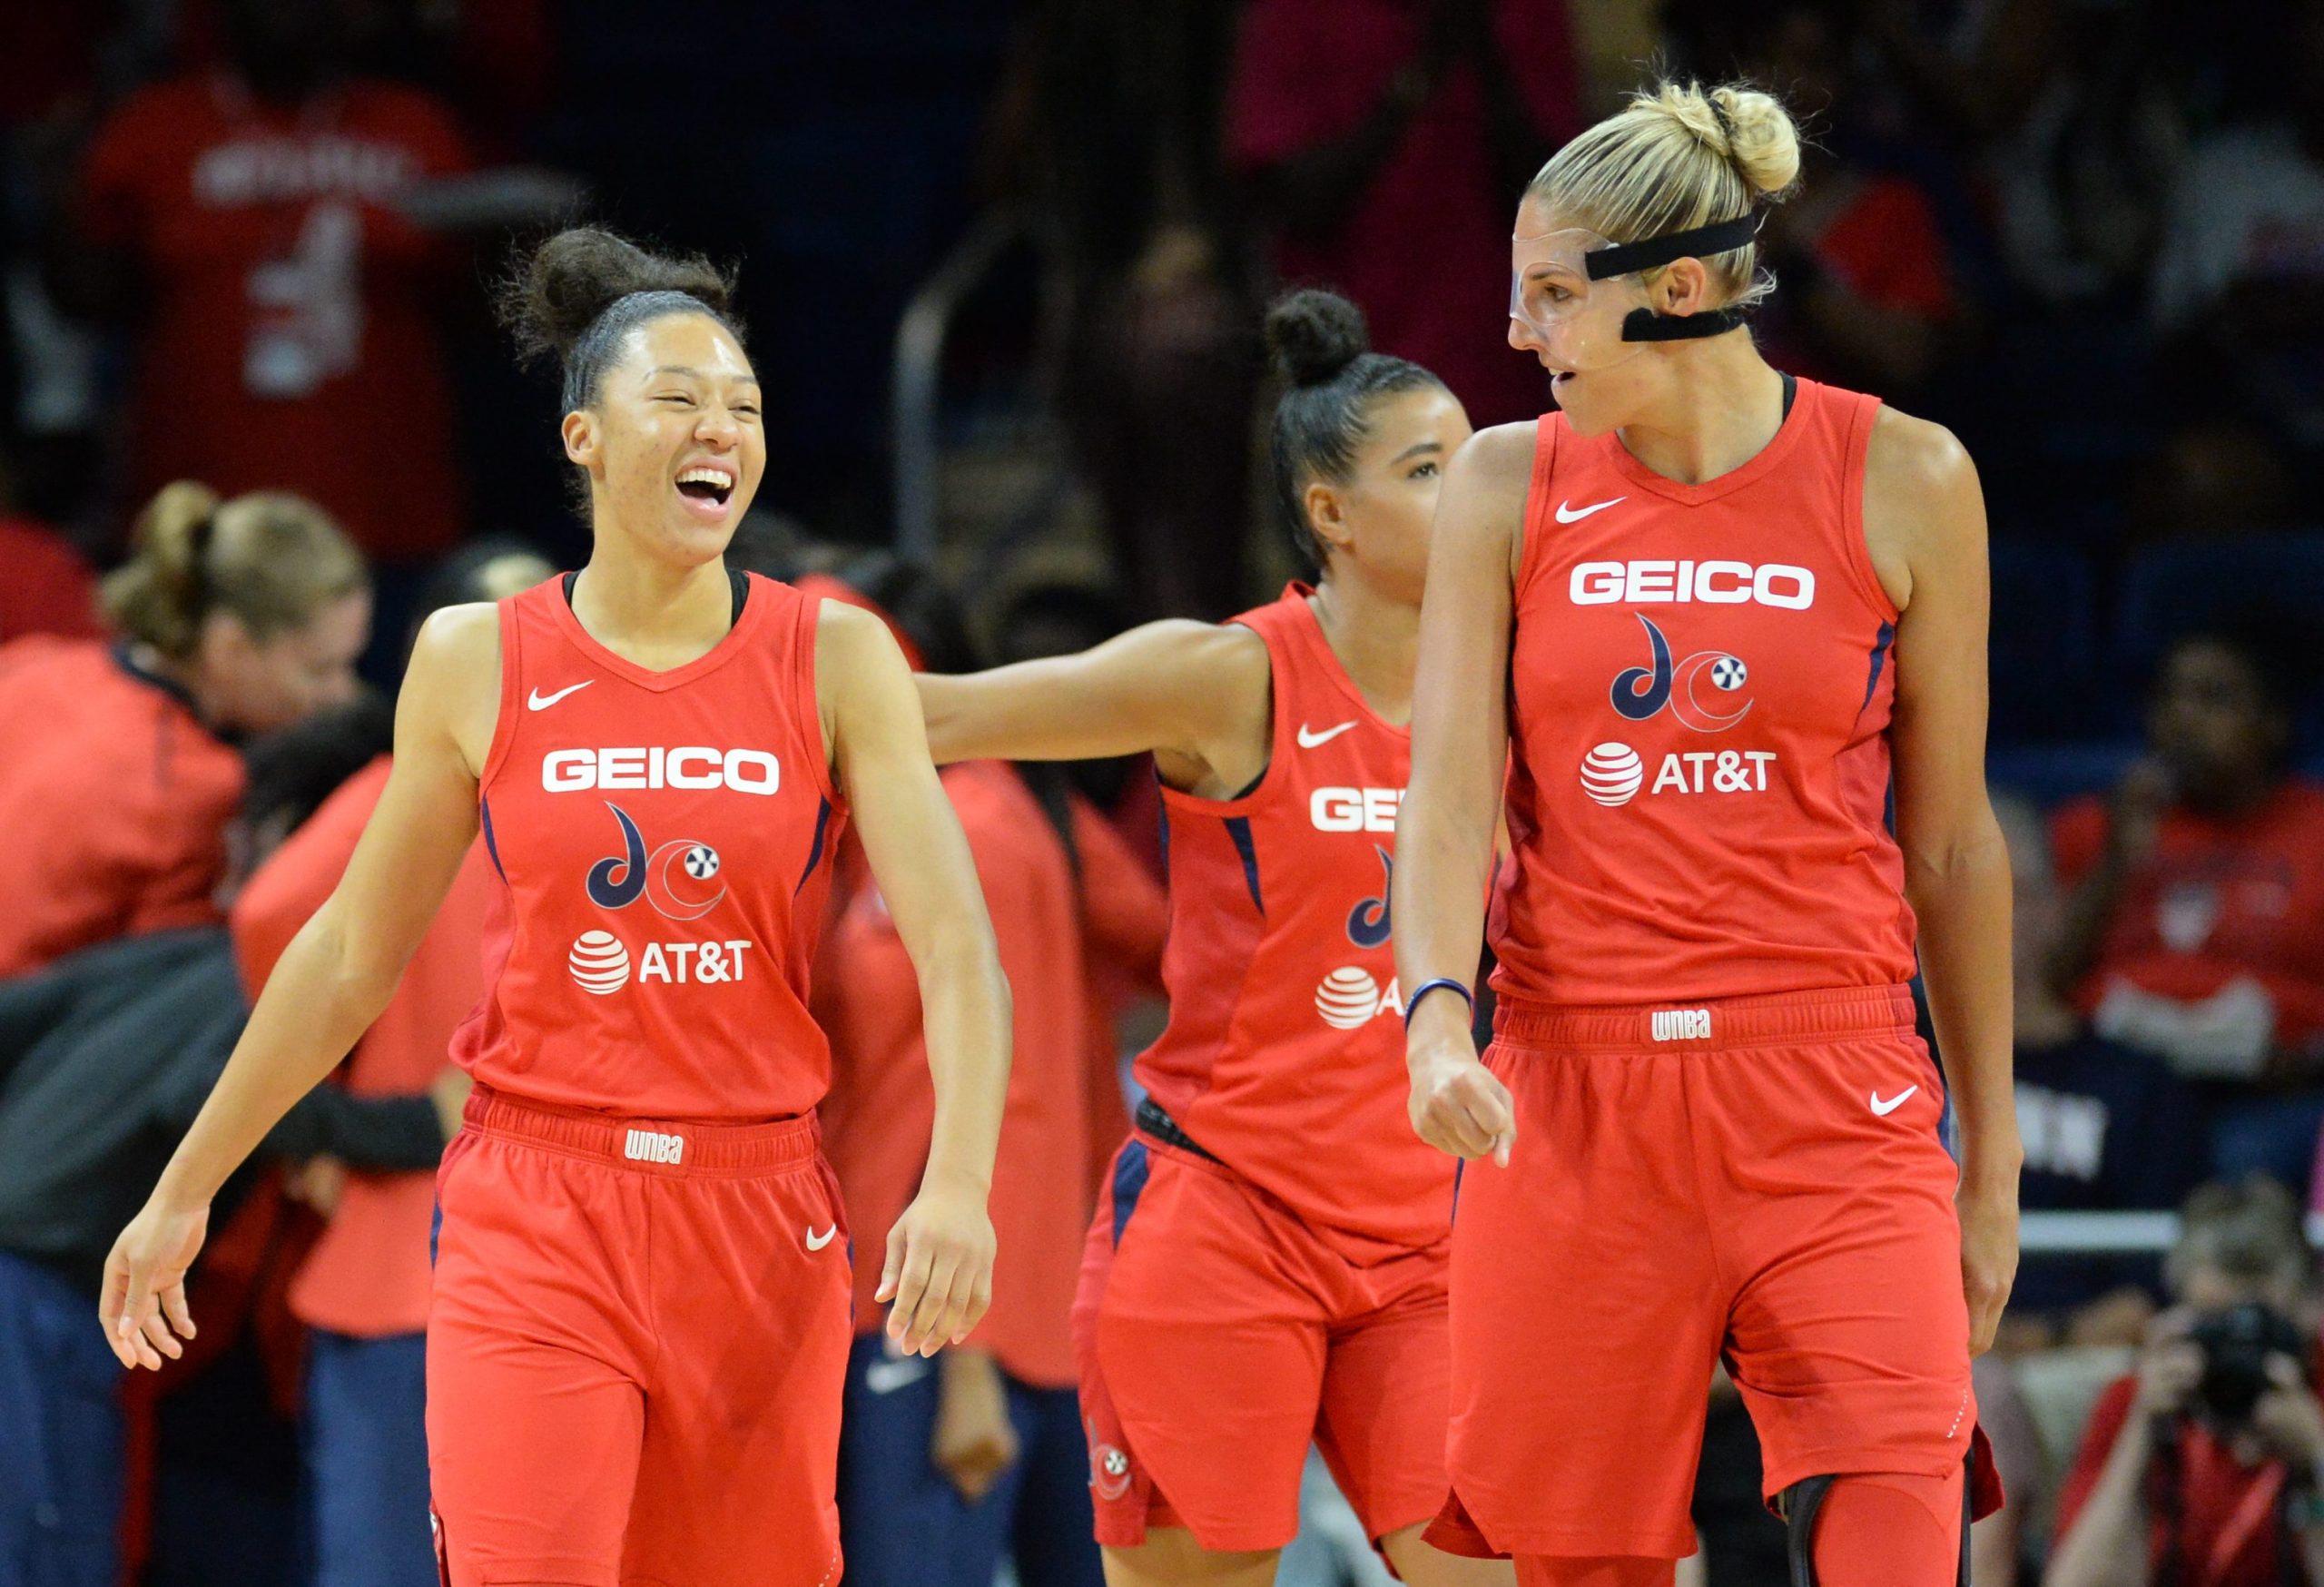 Aerial Powers smiling laughing with Elena Delle Donne